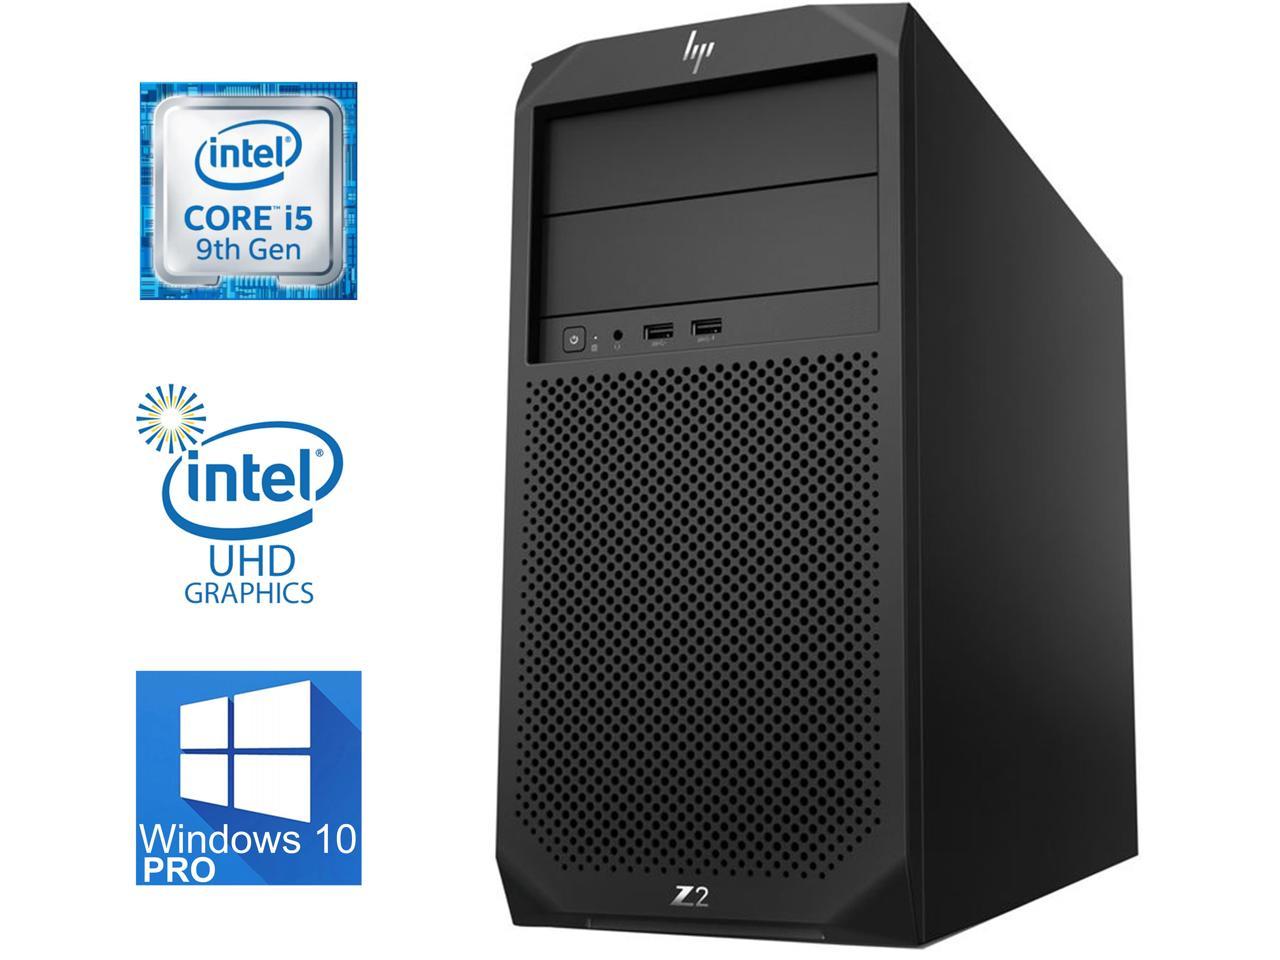 HP Z2 G4 Tower Workstation, 6-Core i5-9500 up to 4.40GHz, 64GB DDR4, 1TB SSD, Windows 10 Pro, USB 3.1, WiFi, 4K 3-Monitor Support, Display Port, DVDRW, LAN